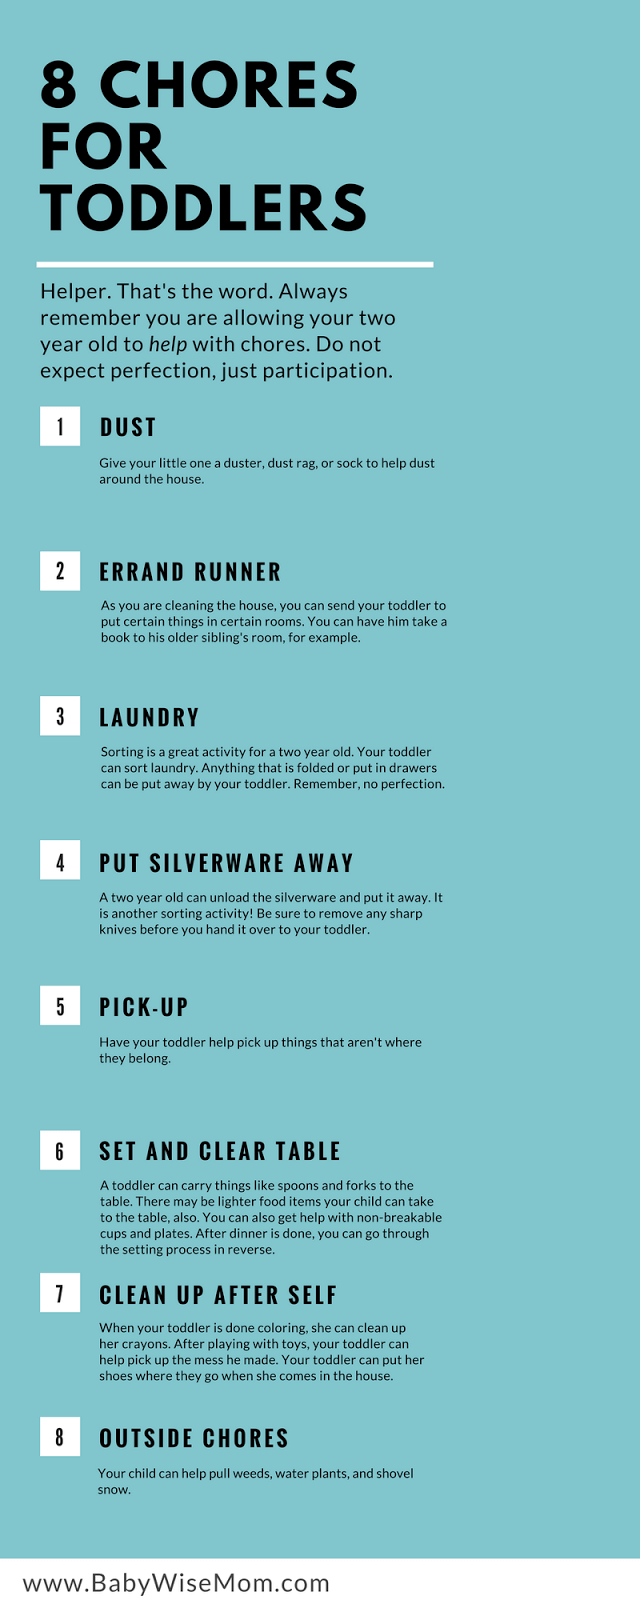 8 Chores for Toddlers Infographic